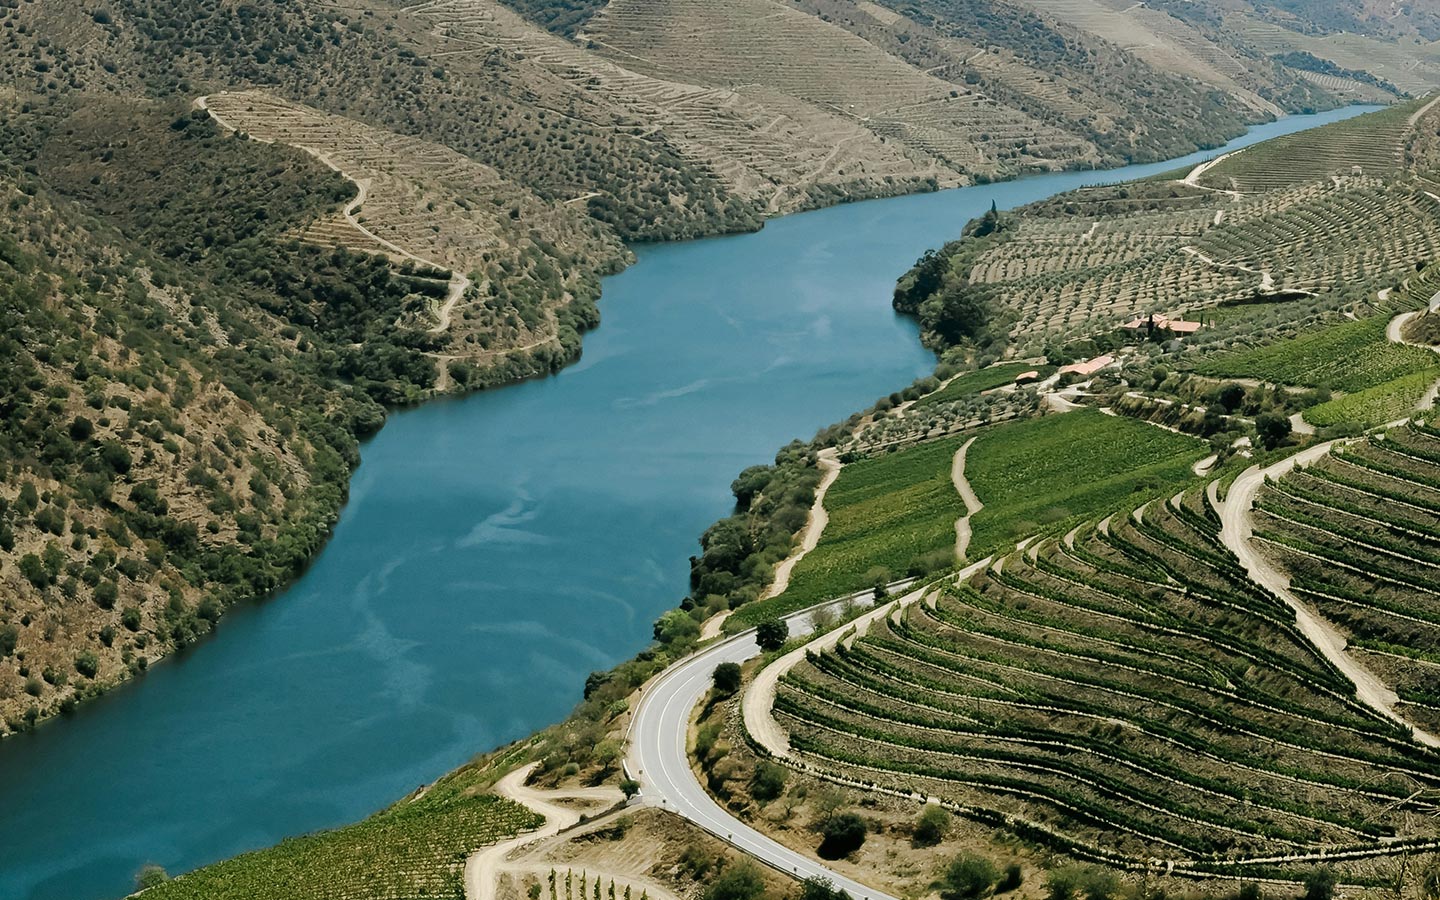 Paddle Power: A two-day Douro River kayak journey